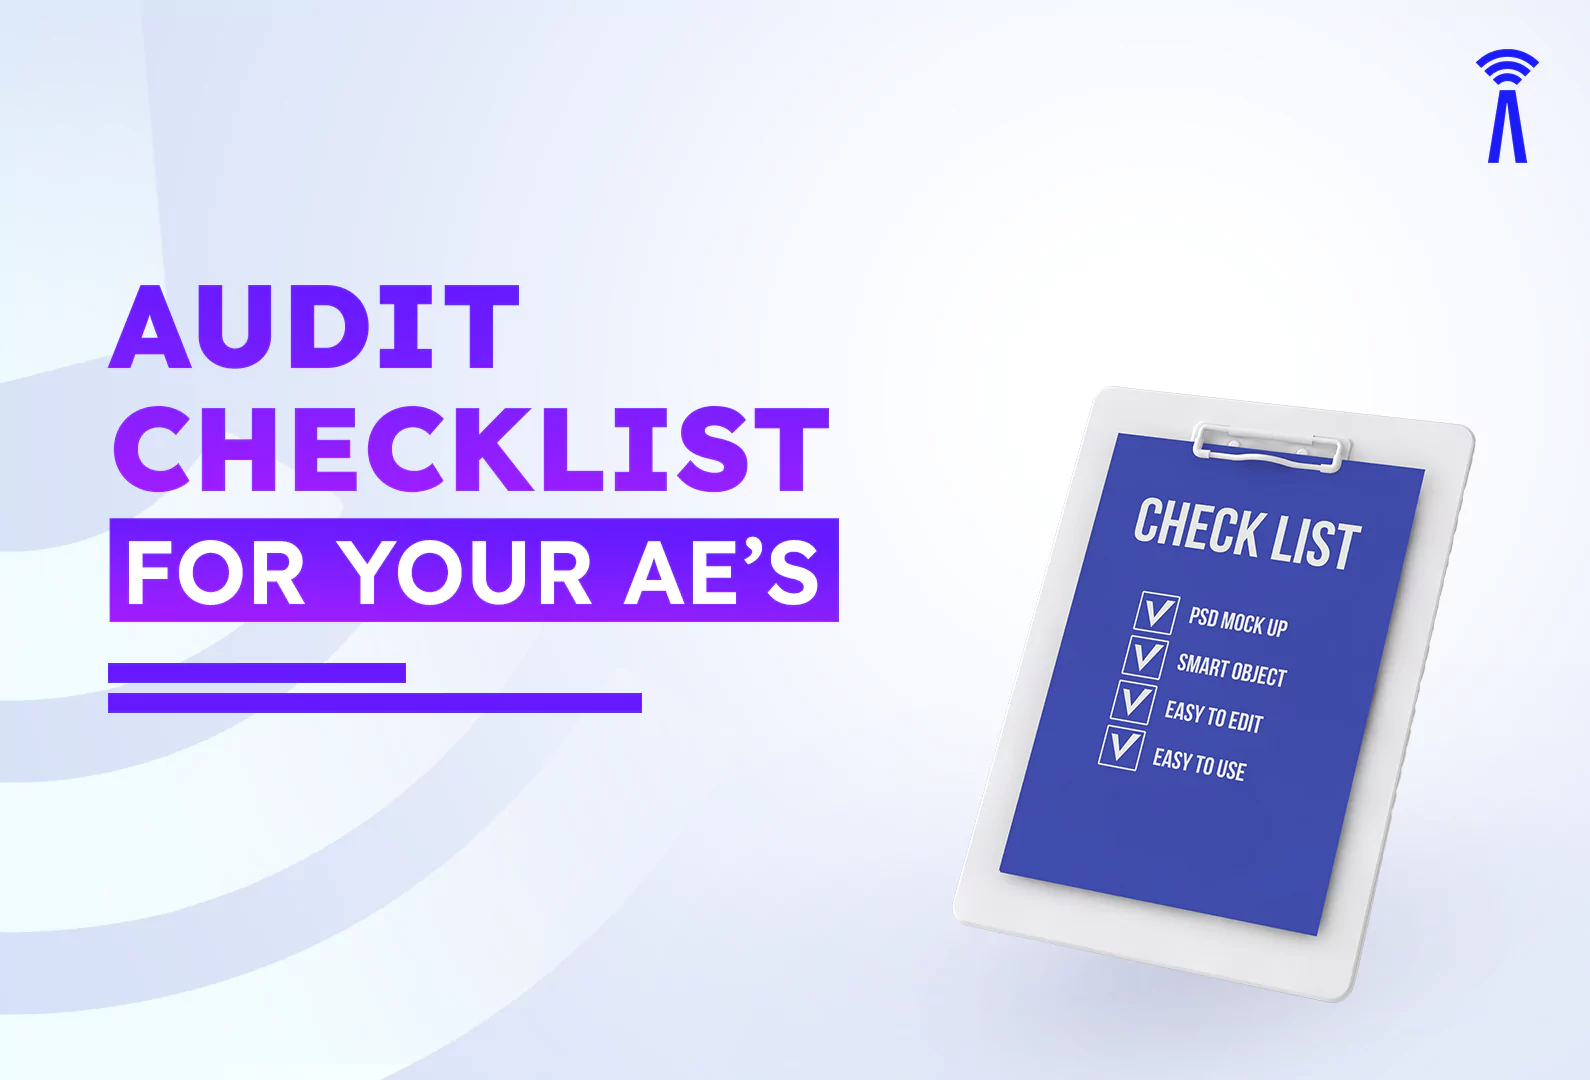 the-account-based-abx-audit-checklist-for-your-aes